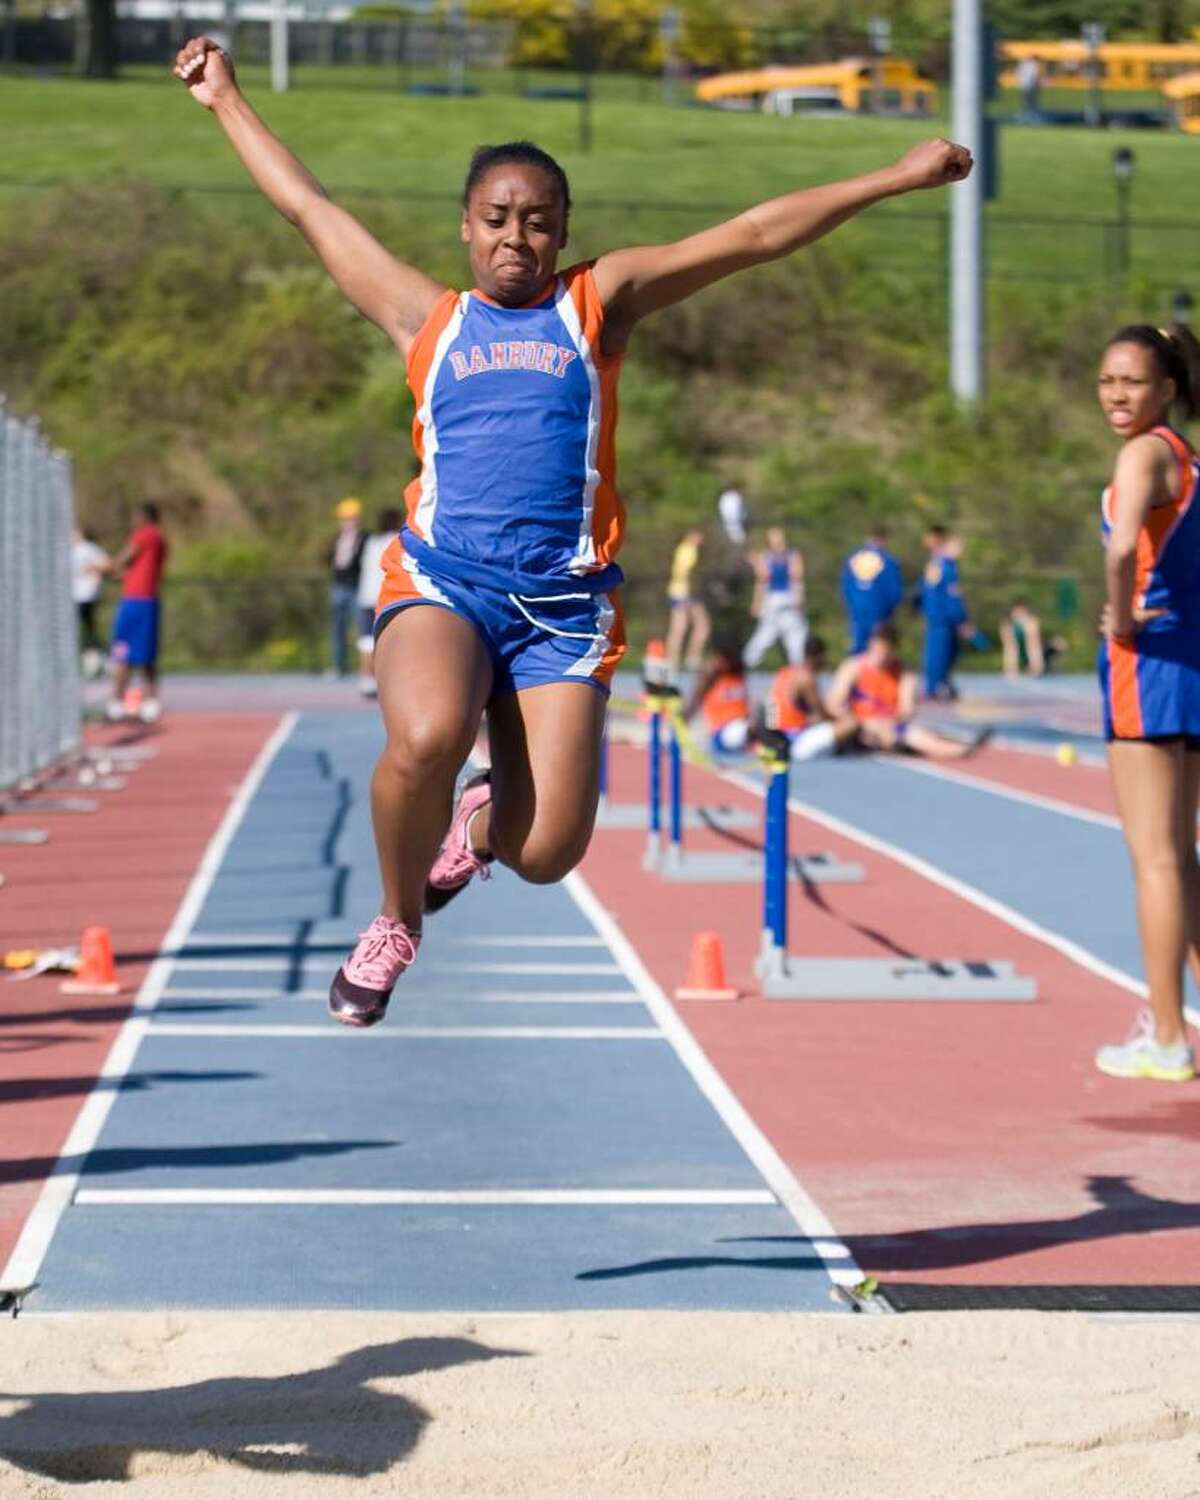 Danbury's Destiny Smith triple jumps during competition at the O'Grady Relays Saturday at Danbury High.